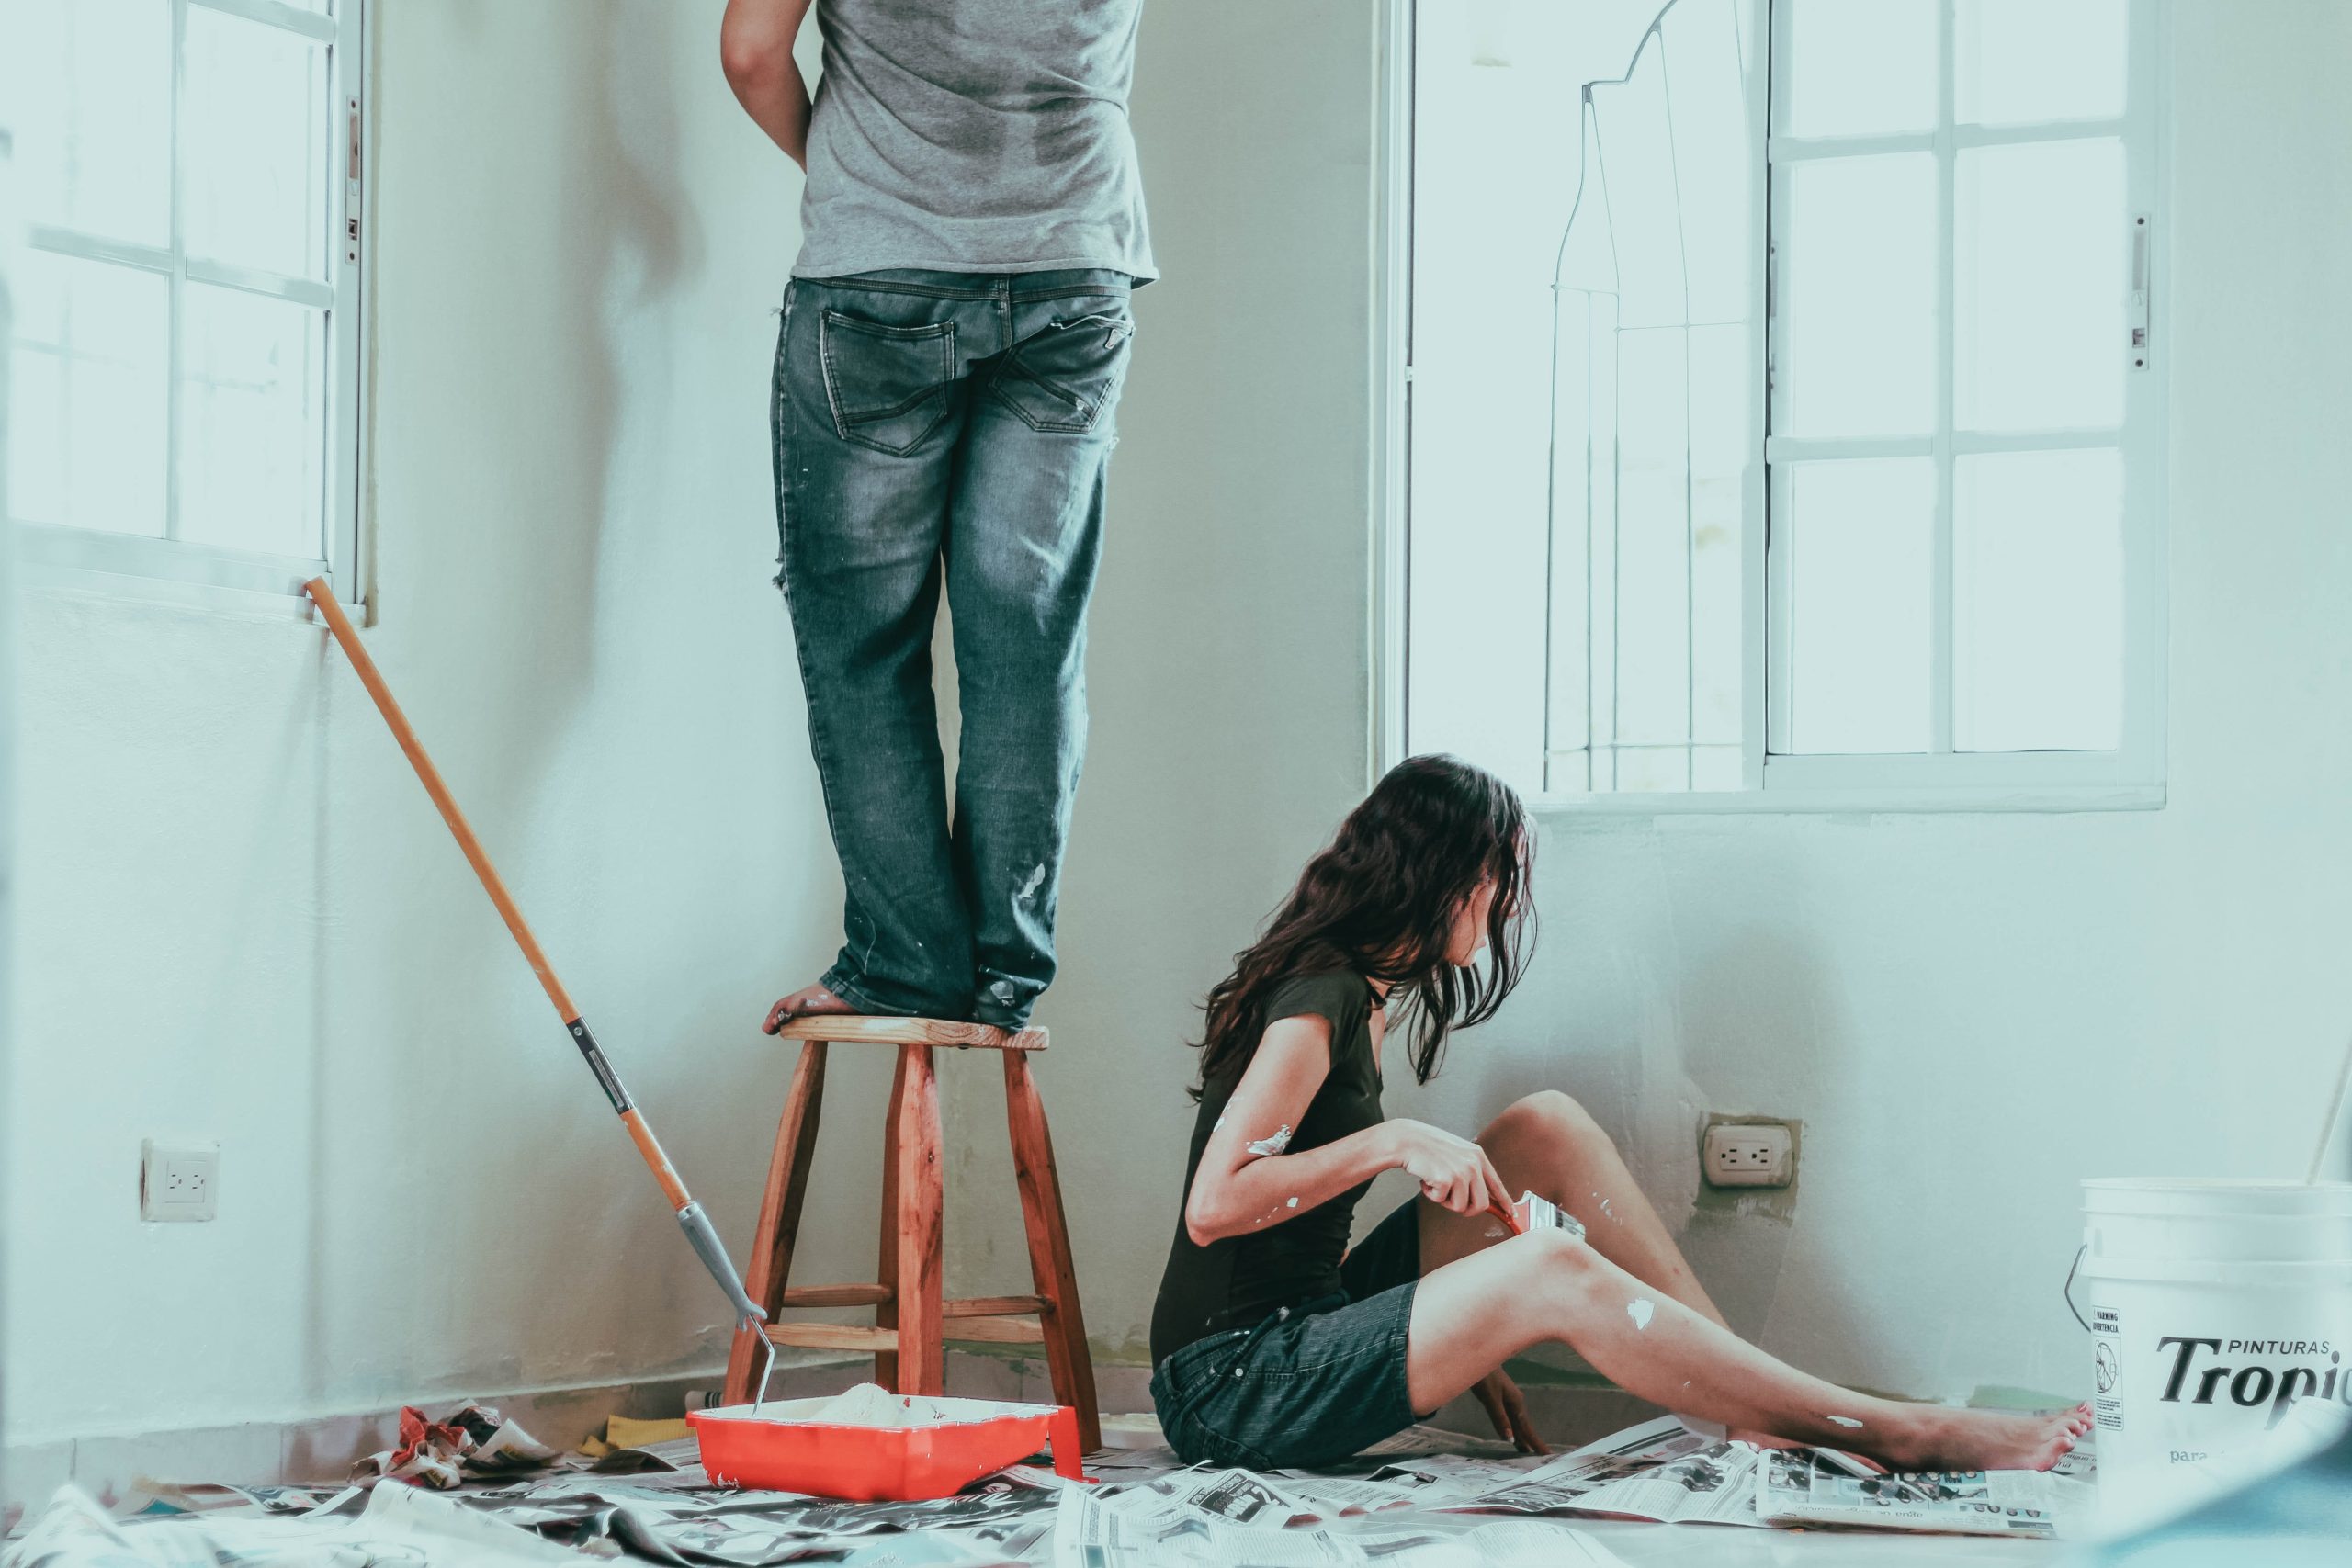 two people painting, the woman sitting on the floor while the man is standing on a stool